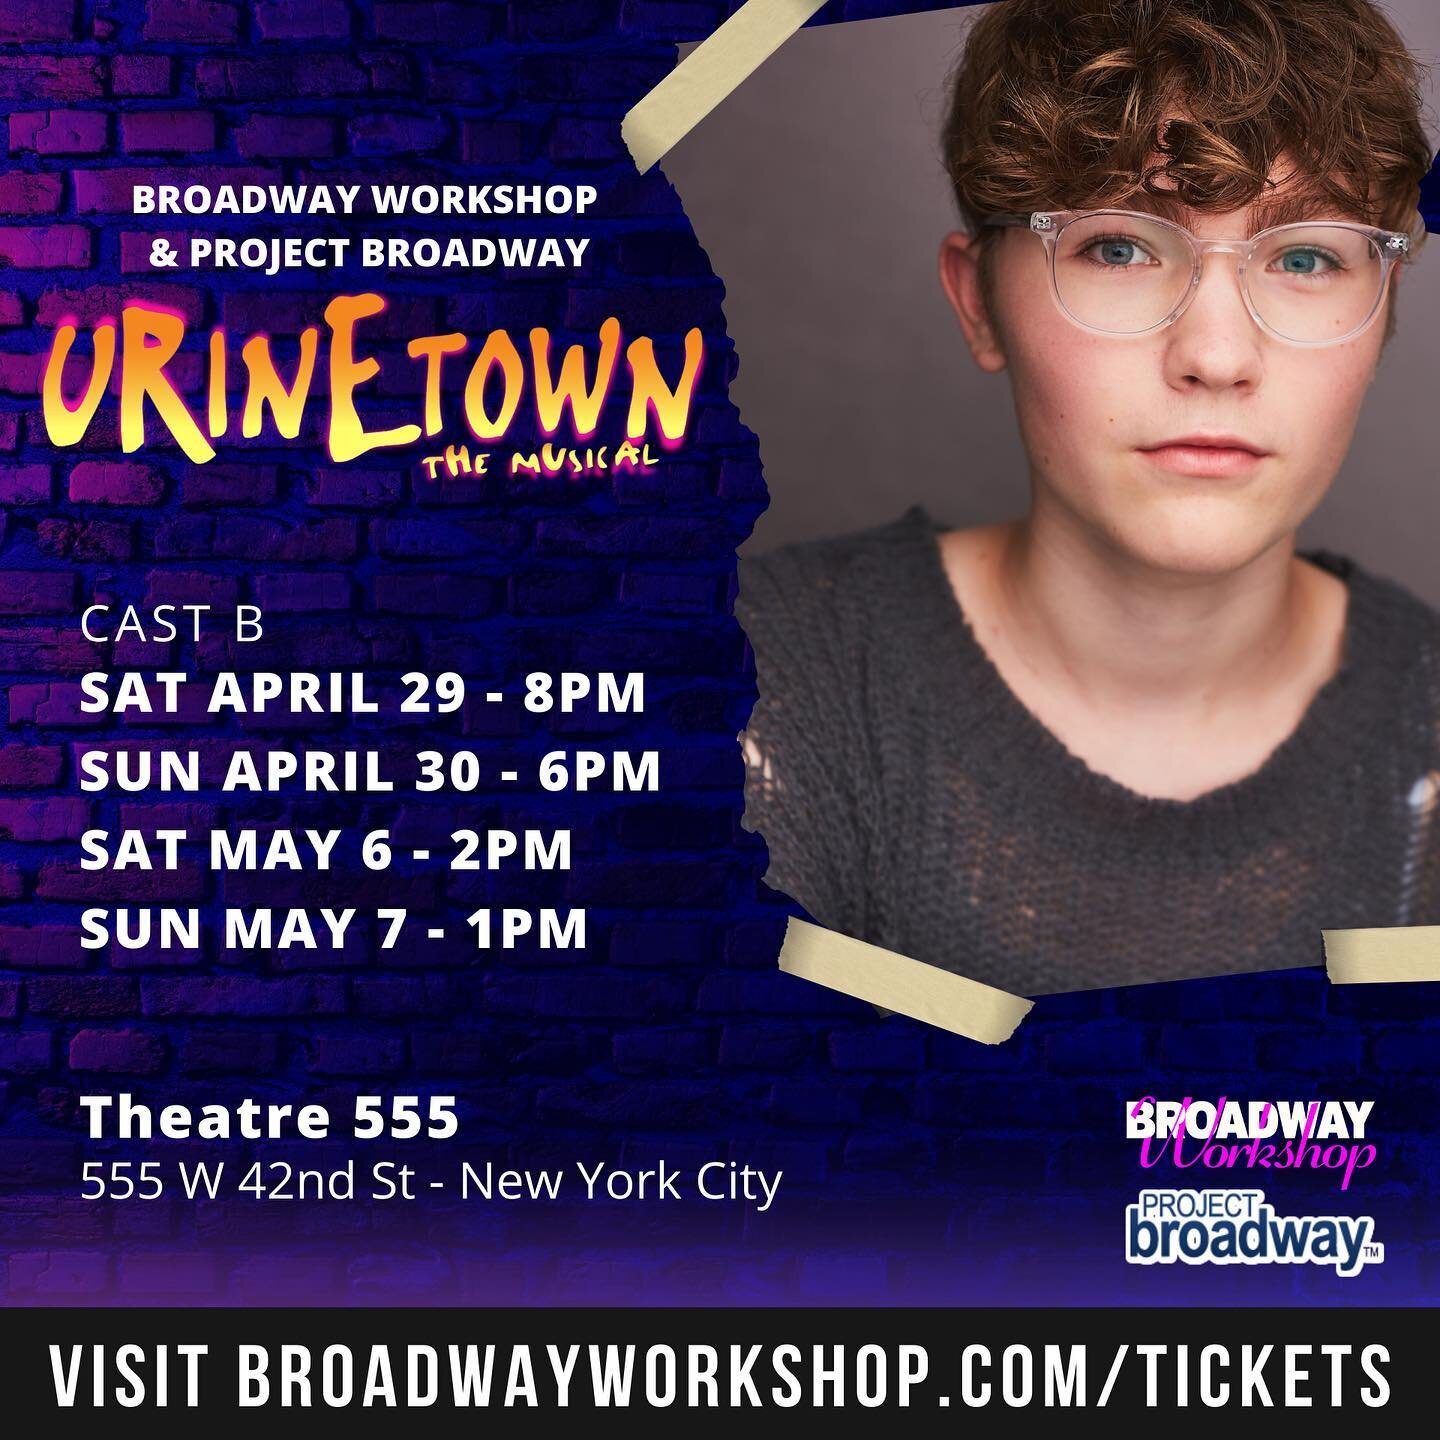 Tickets to Broadway Workshop &amp; Project Broadway's 2023 Main Stage Production of URINETOWN are now on sale! Come check me out as Senator Fipp in Cast B. Performances take place at Theater 555 on 42nd St! Can't wait to see you in the audience! 
#Br